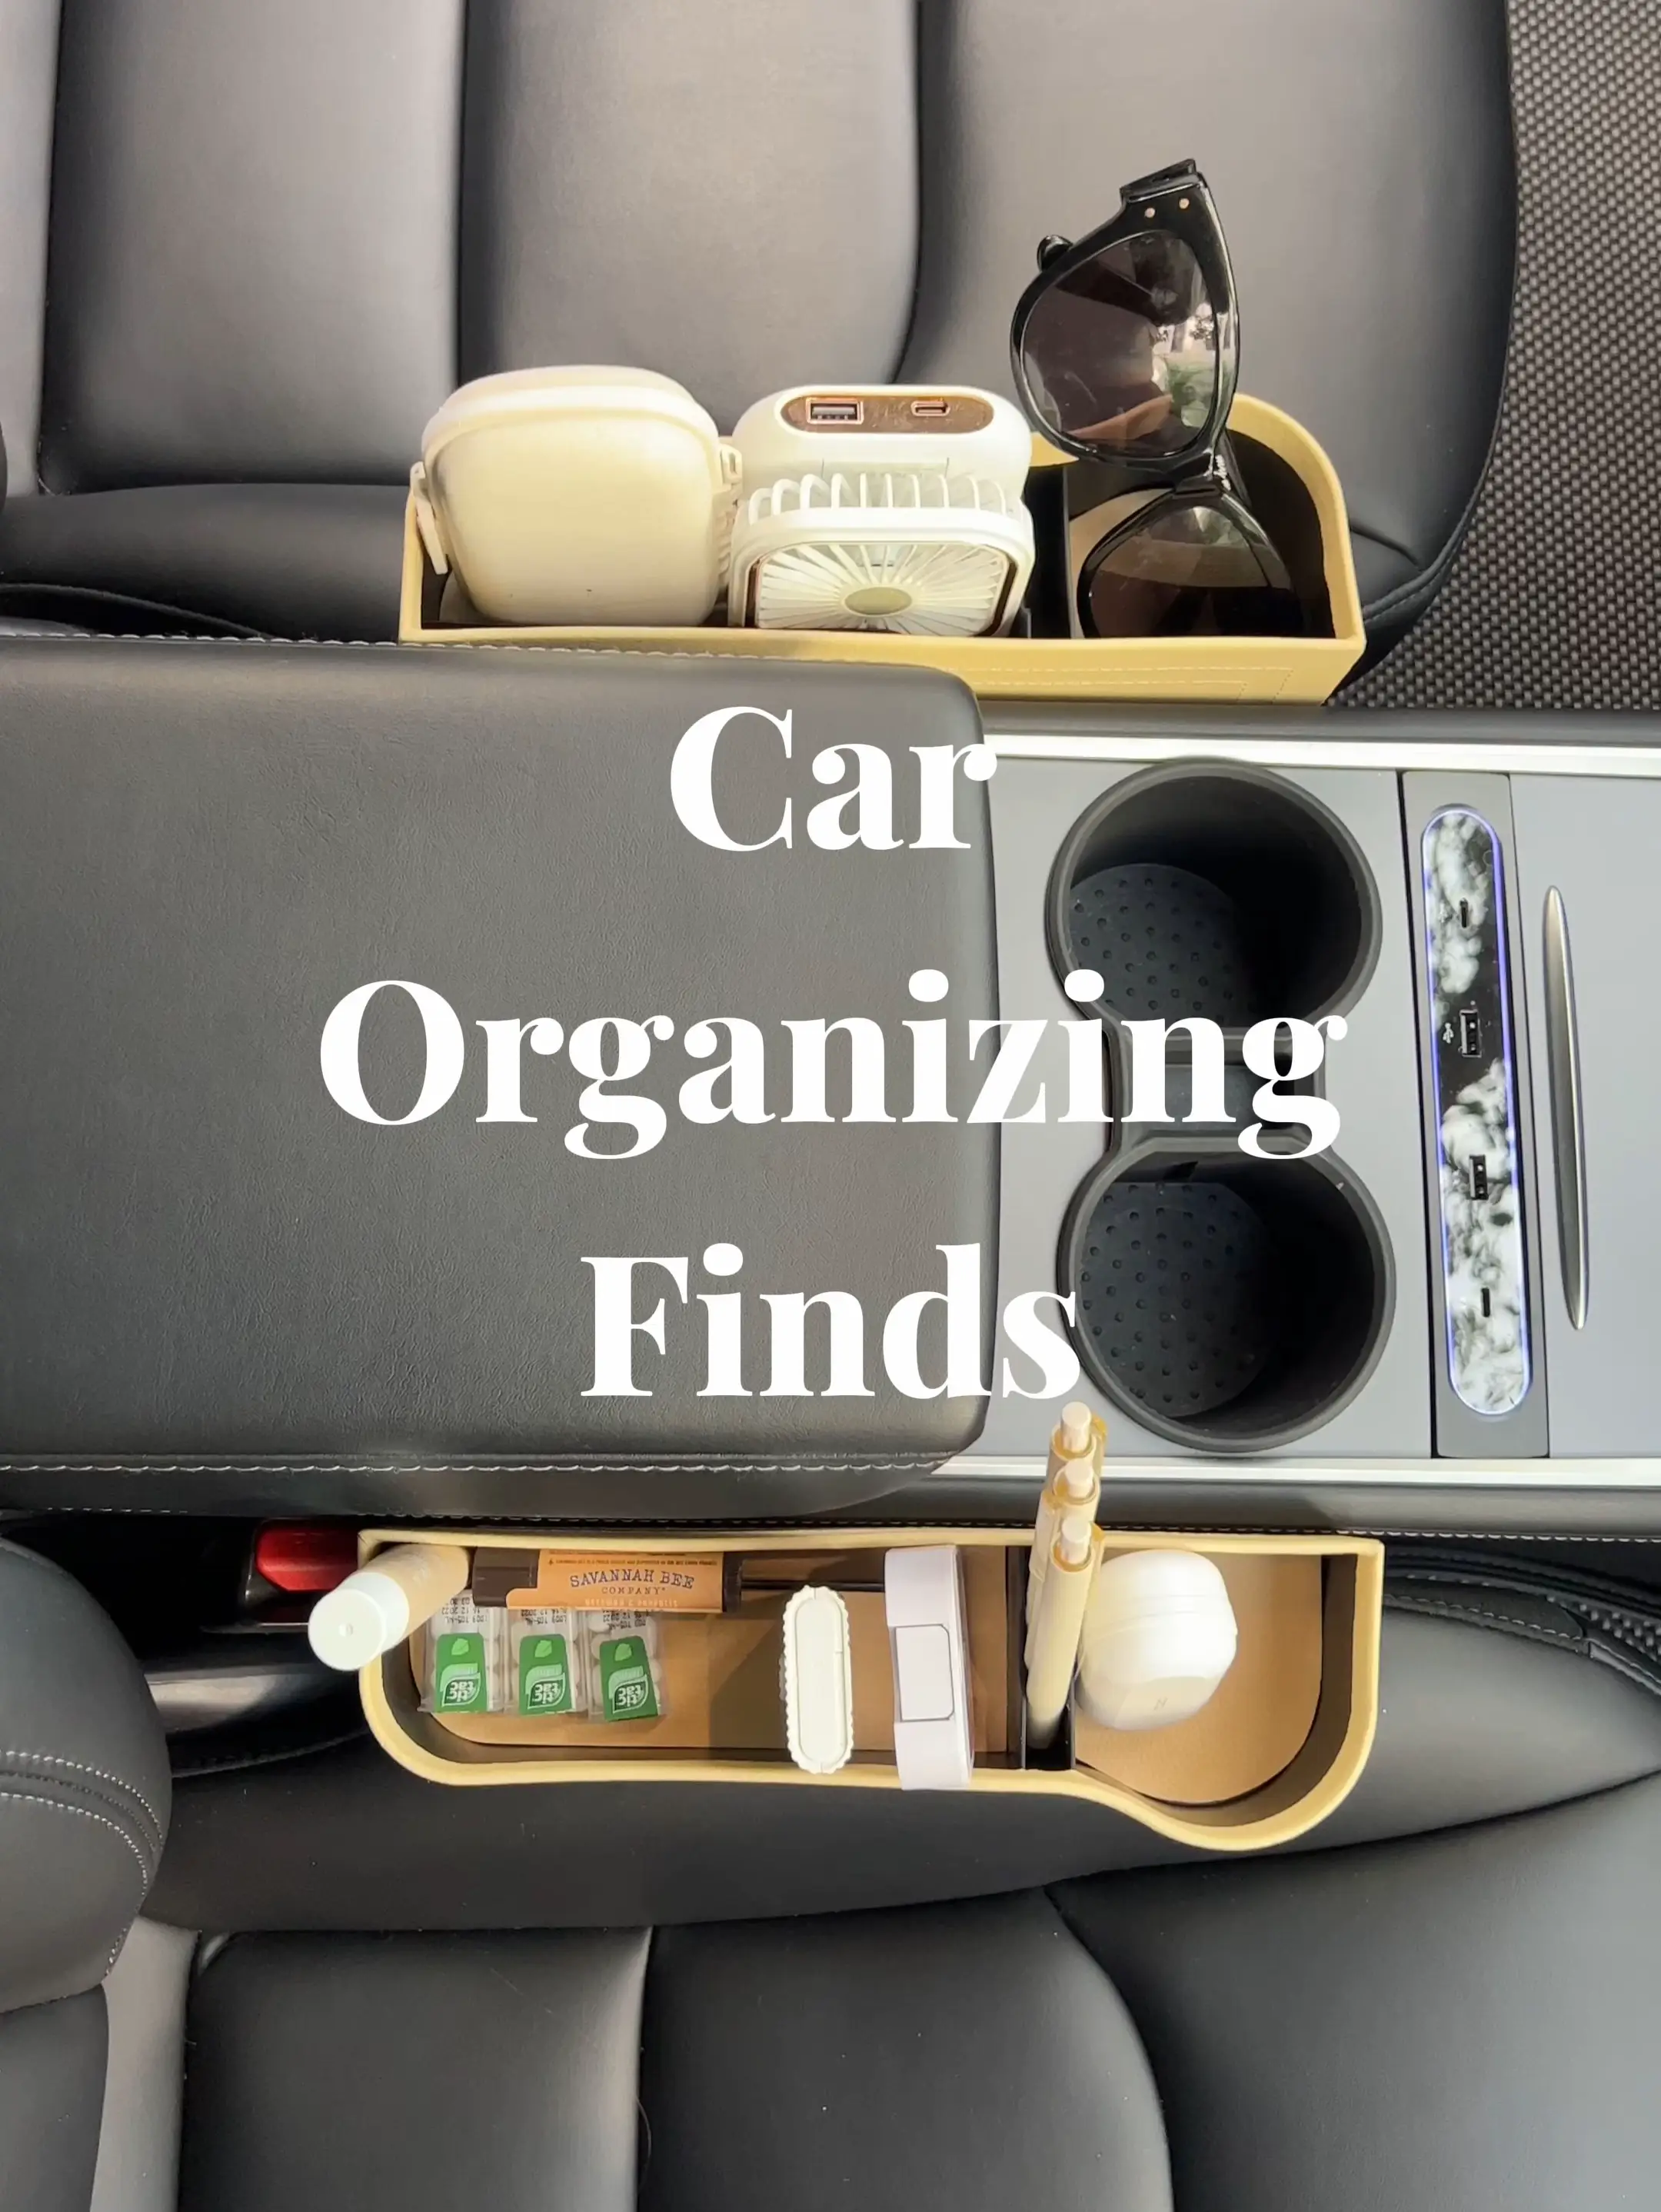 These car gadgets will help you easily get organized